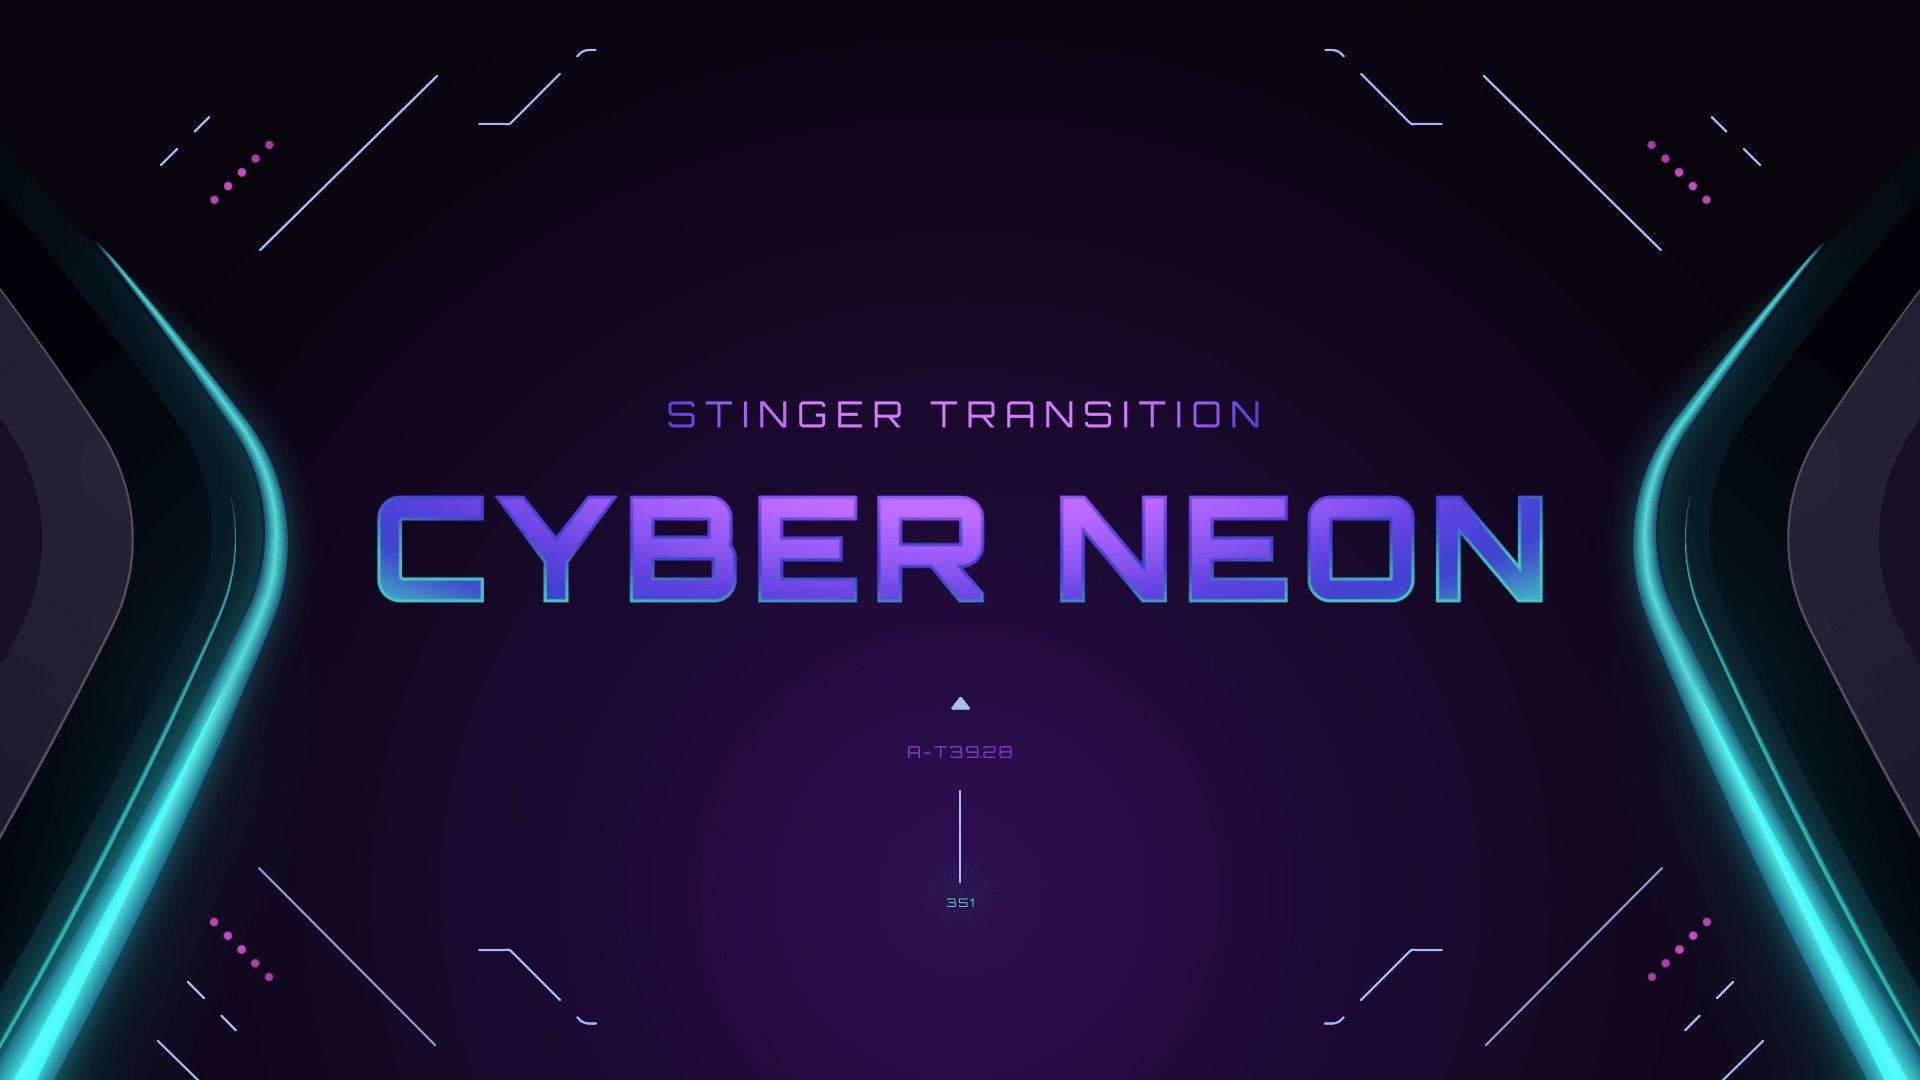 Cyber Neon - Stinger Transition for Twitch, Youtube and Facebook